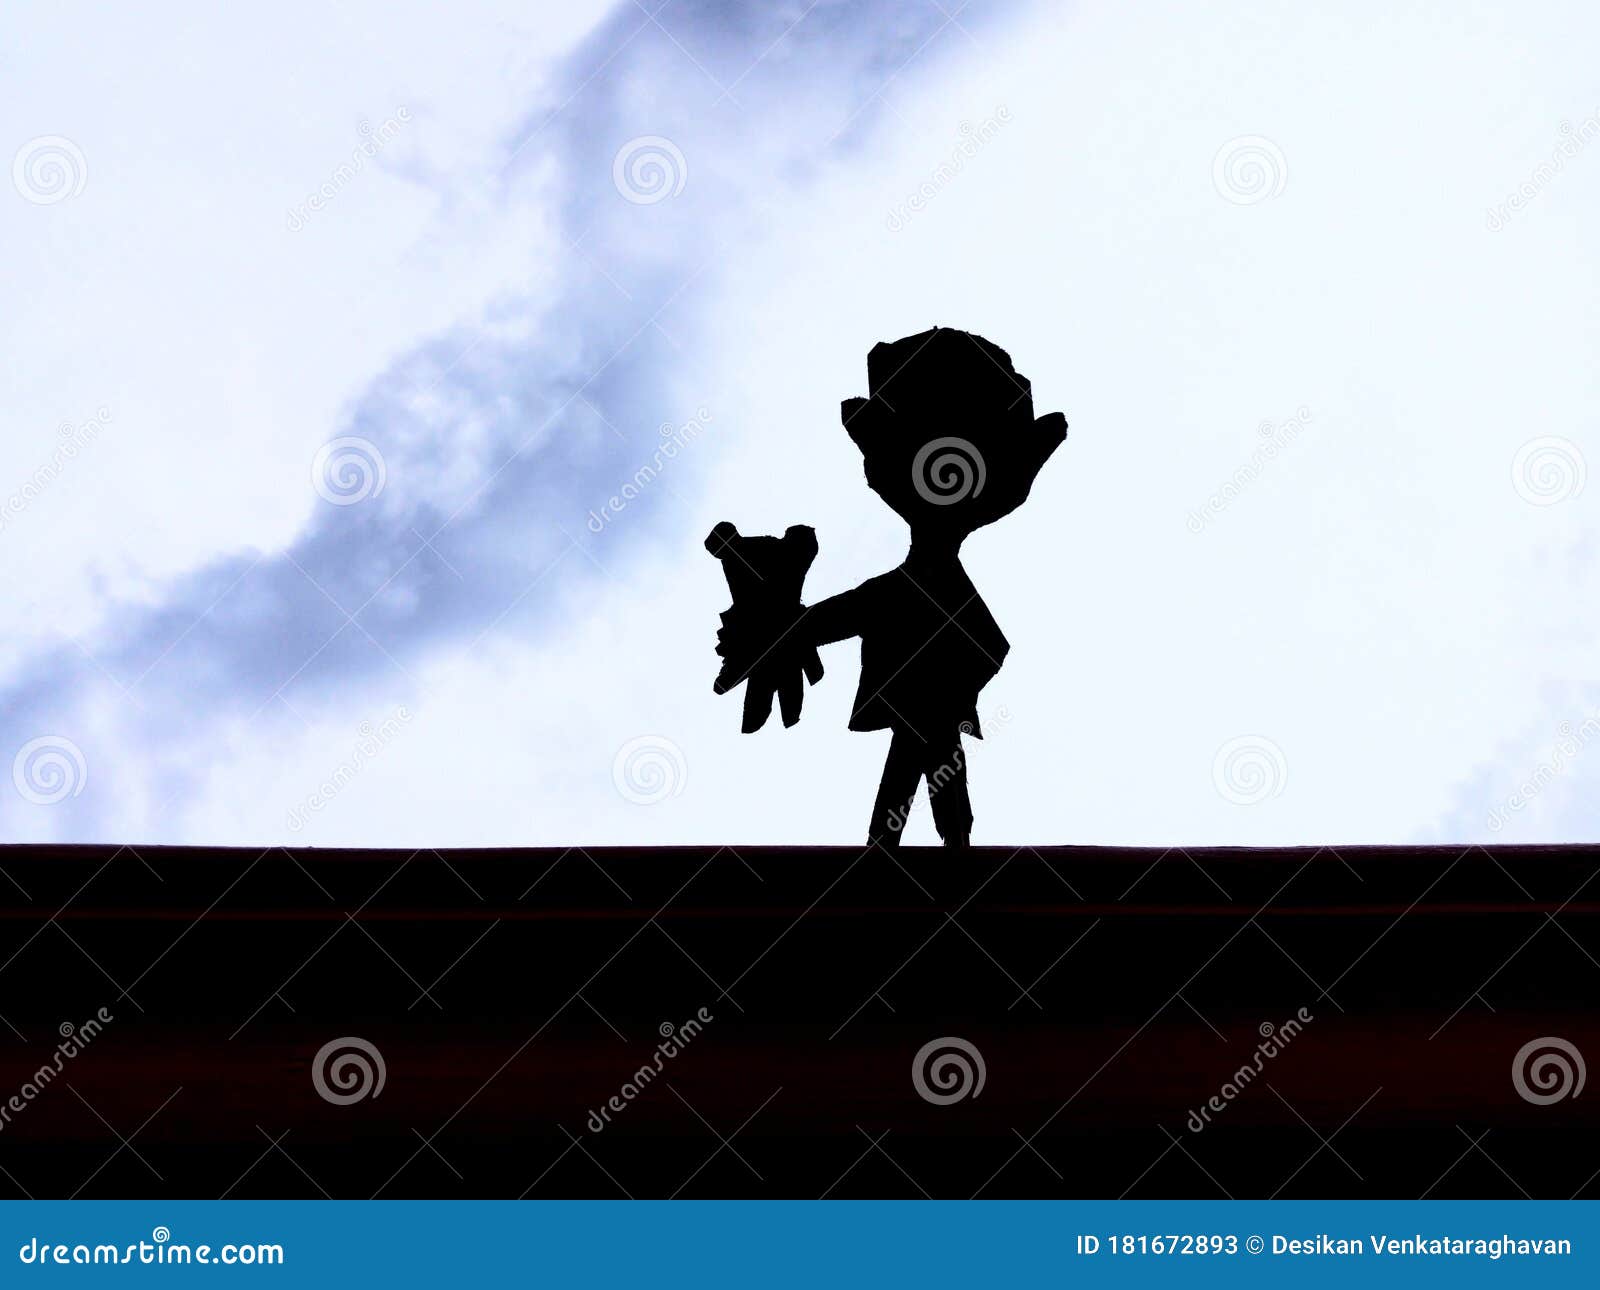 Silhoutte of Mr Bean and Teddy Editorial Stock Photo - Image of bean, font:  181672893